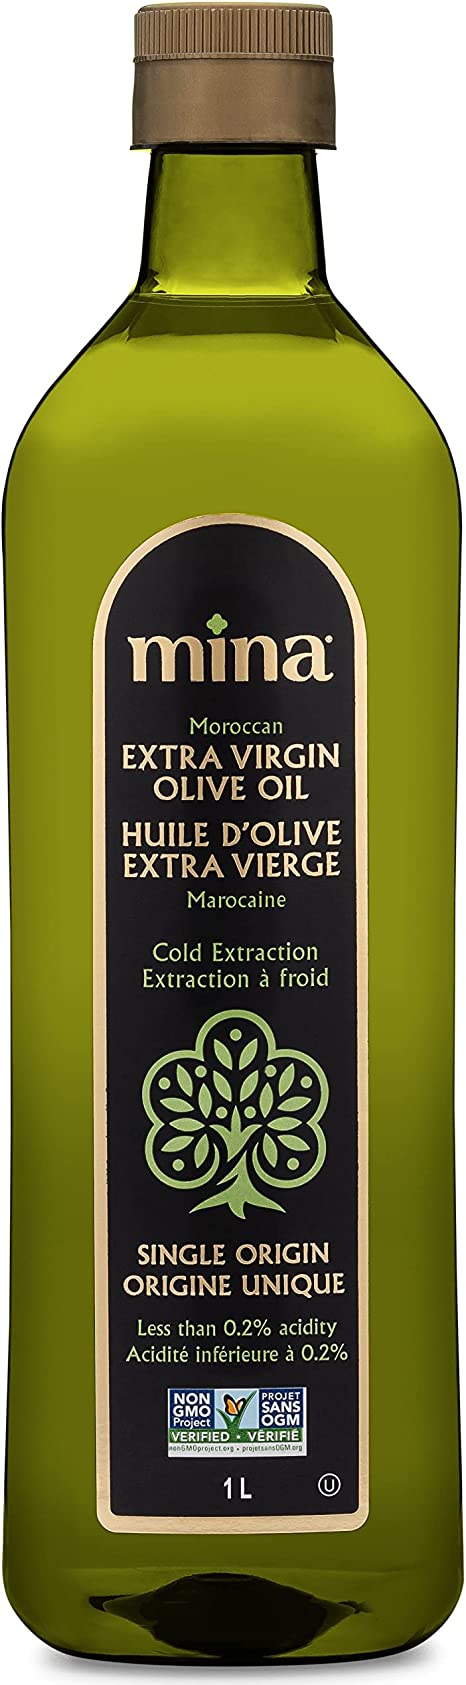 Mina Extra Virgin Olive Oil, Single Origin, Cold Extracted, Moroccan Olive Oil High in Polyphenols, 1 LITER – 33.8 Fl Oz